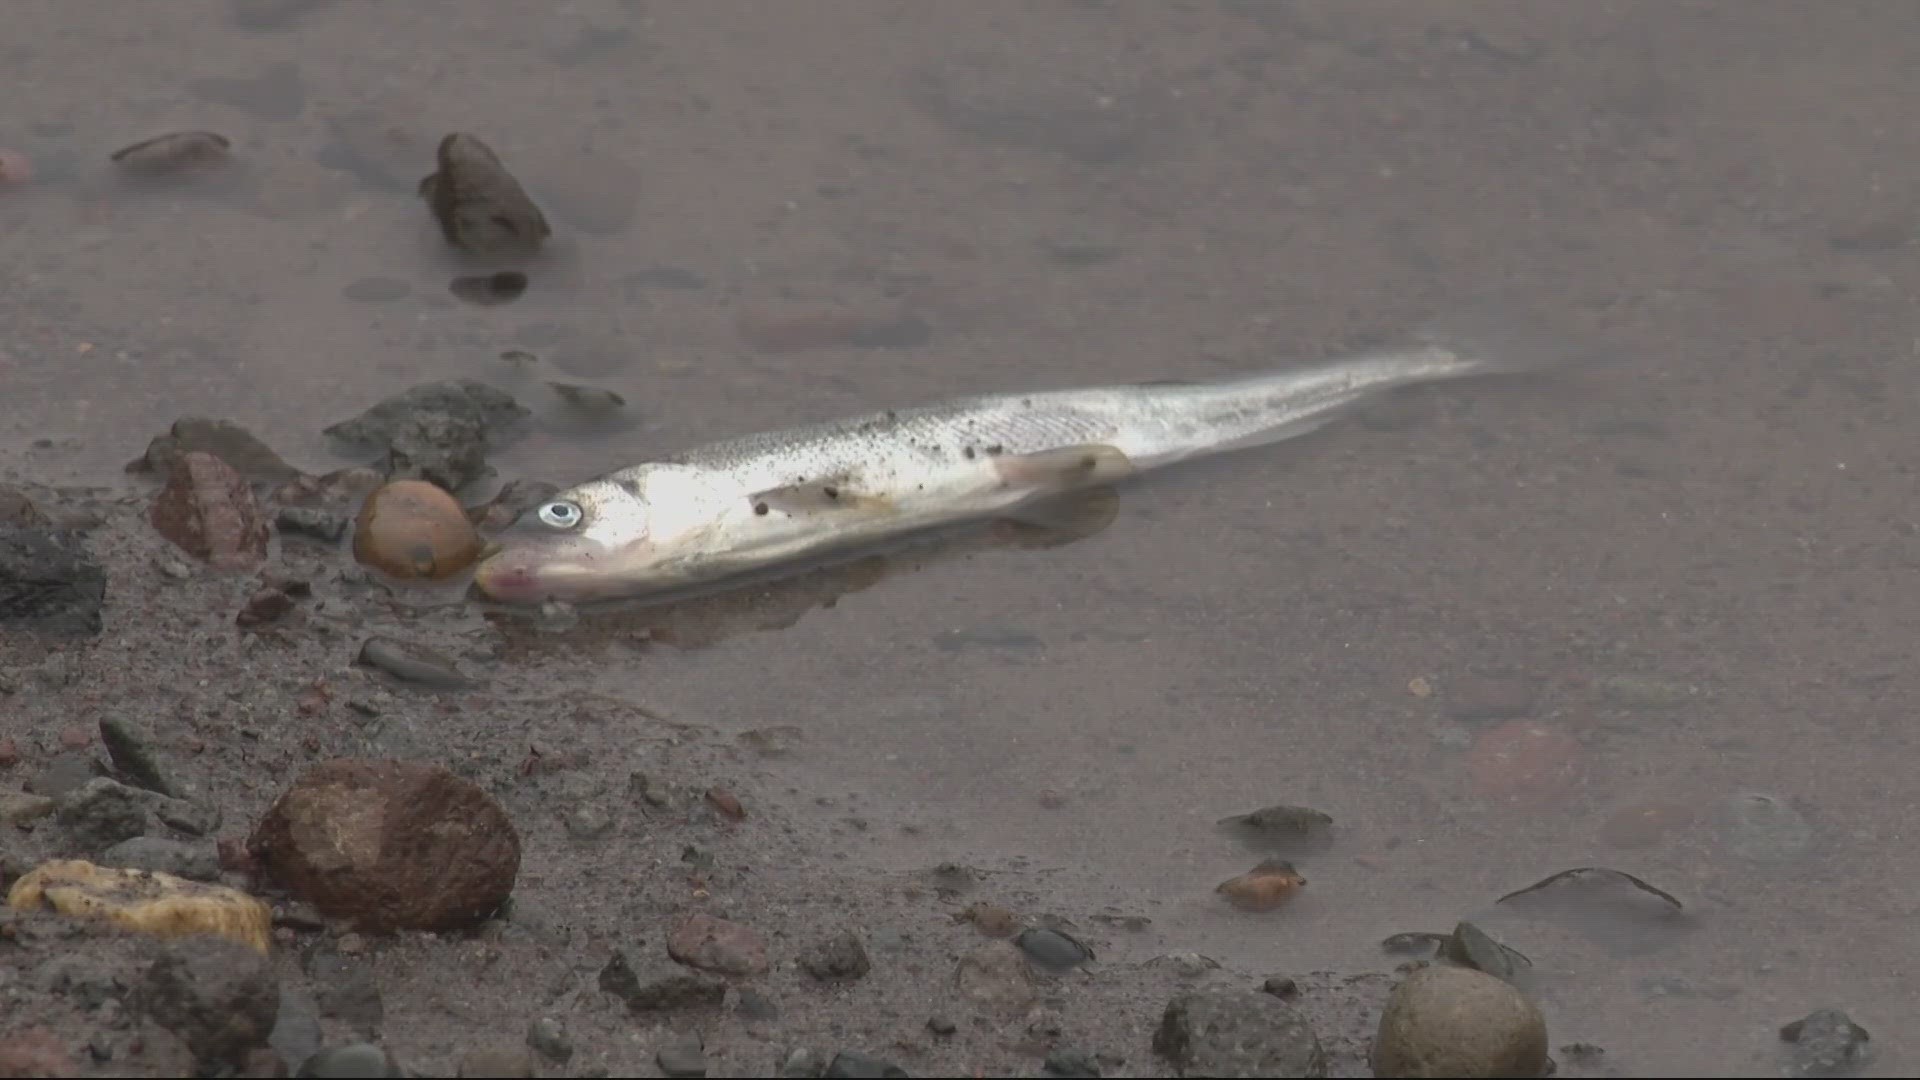 Tucker Jones with the Oregon Department of Fish and Wildlife said the scores of dead smelt are a sign that nature is functioning as it should.